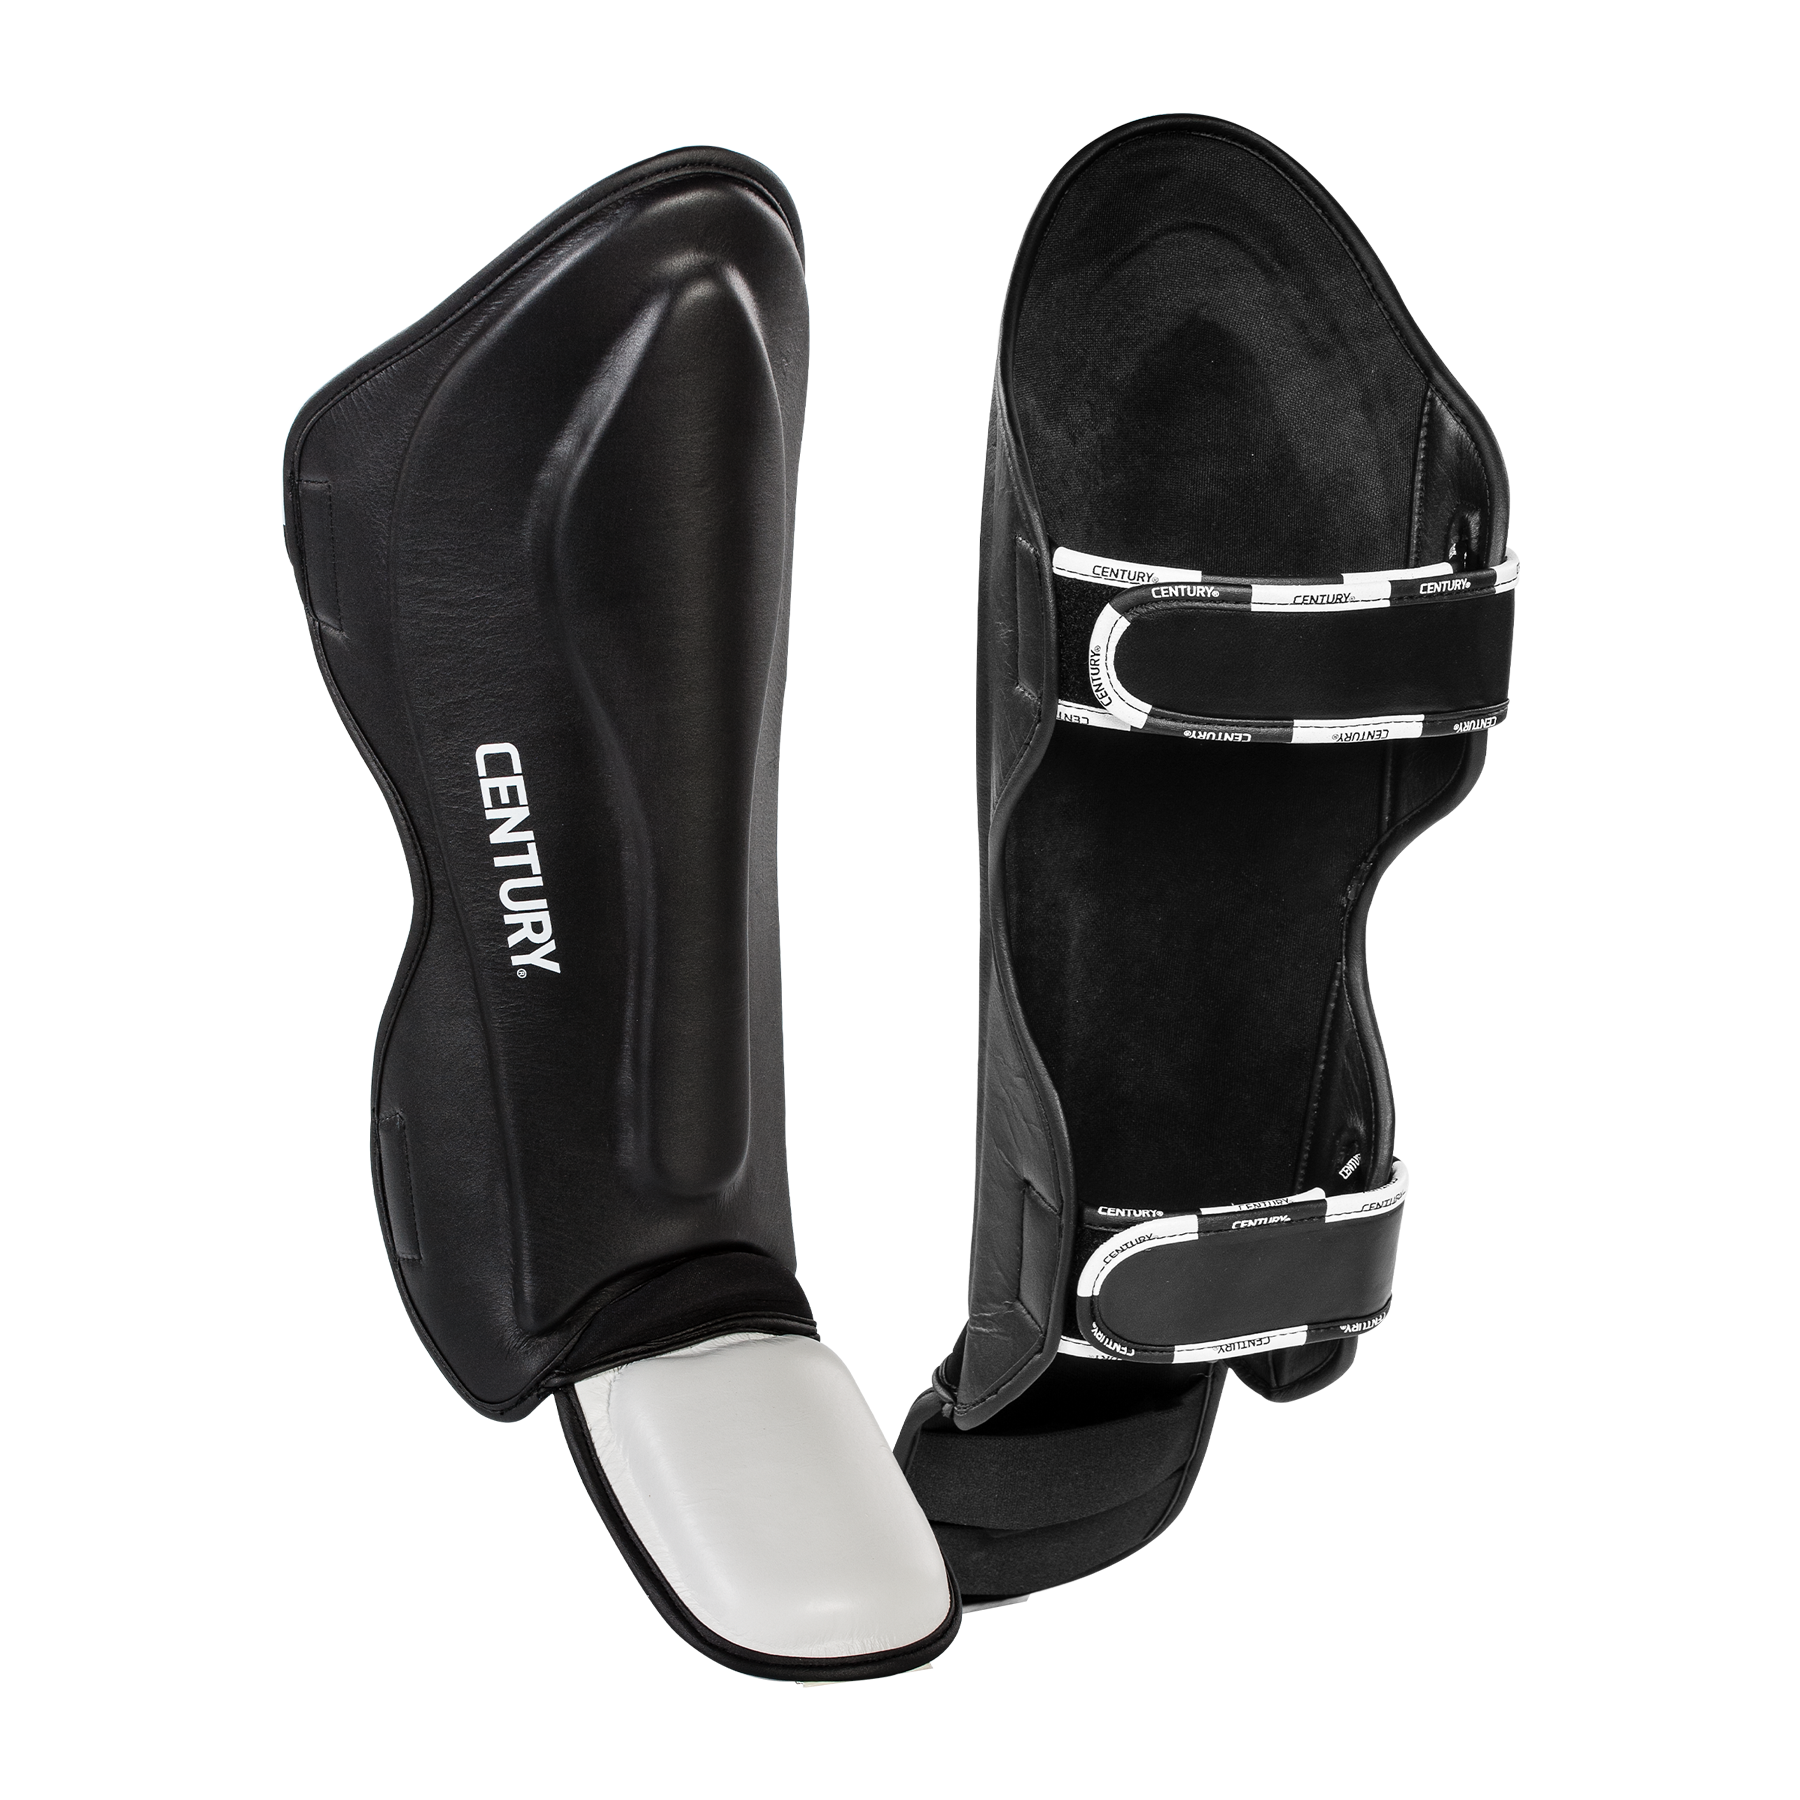 Creed Traditional Shin Instep Guards Black/White